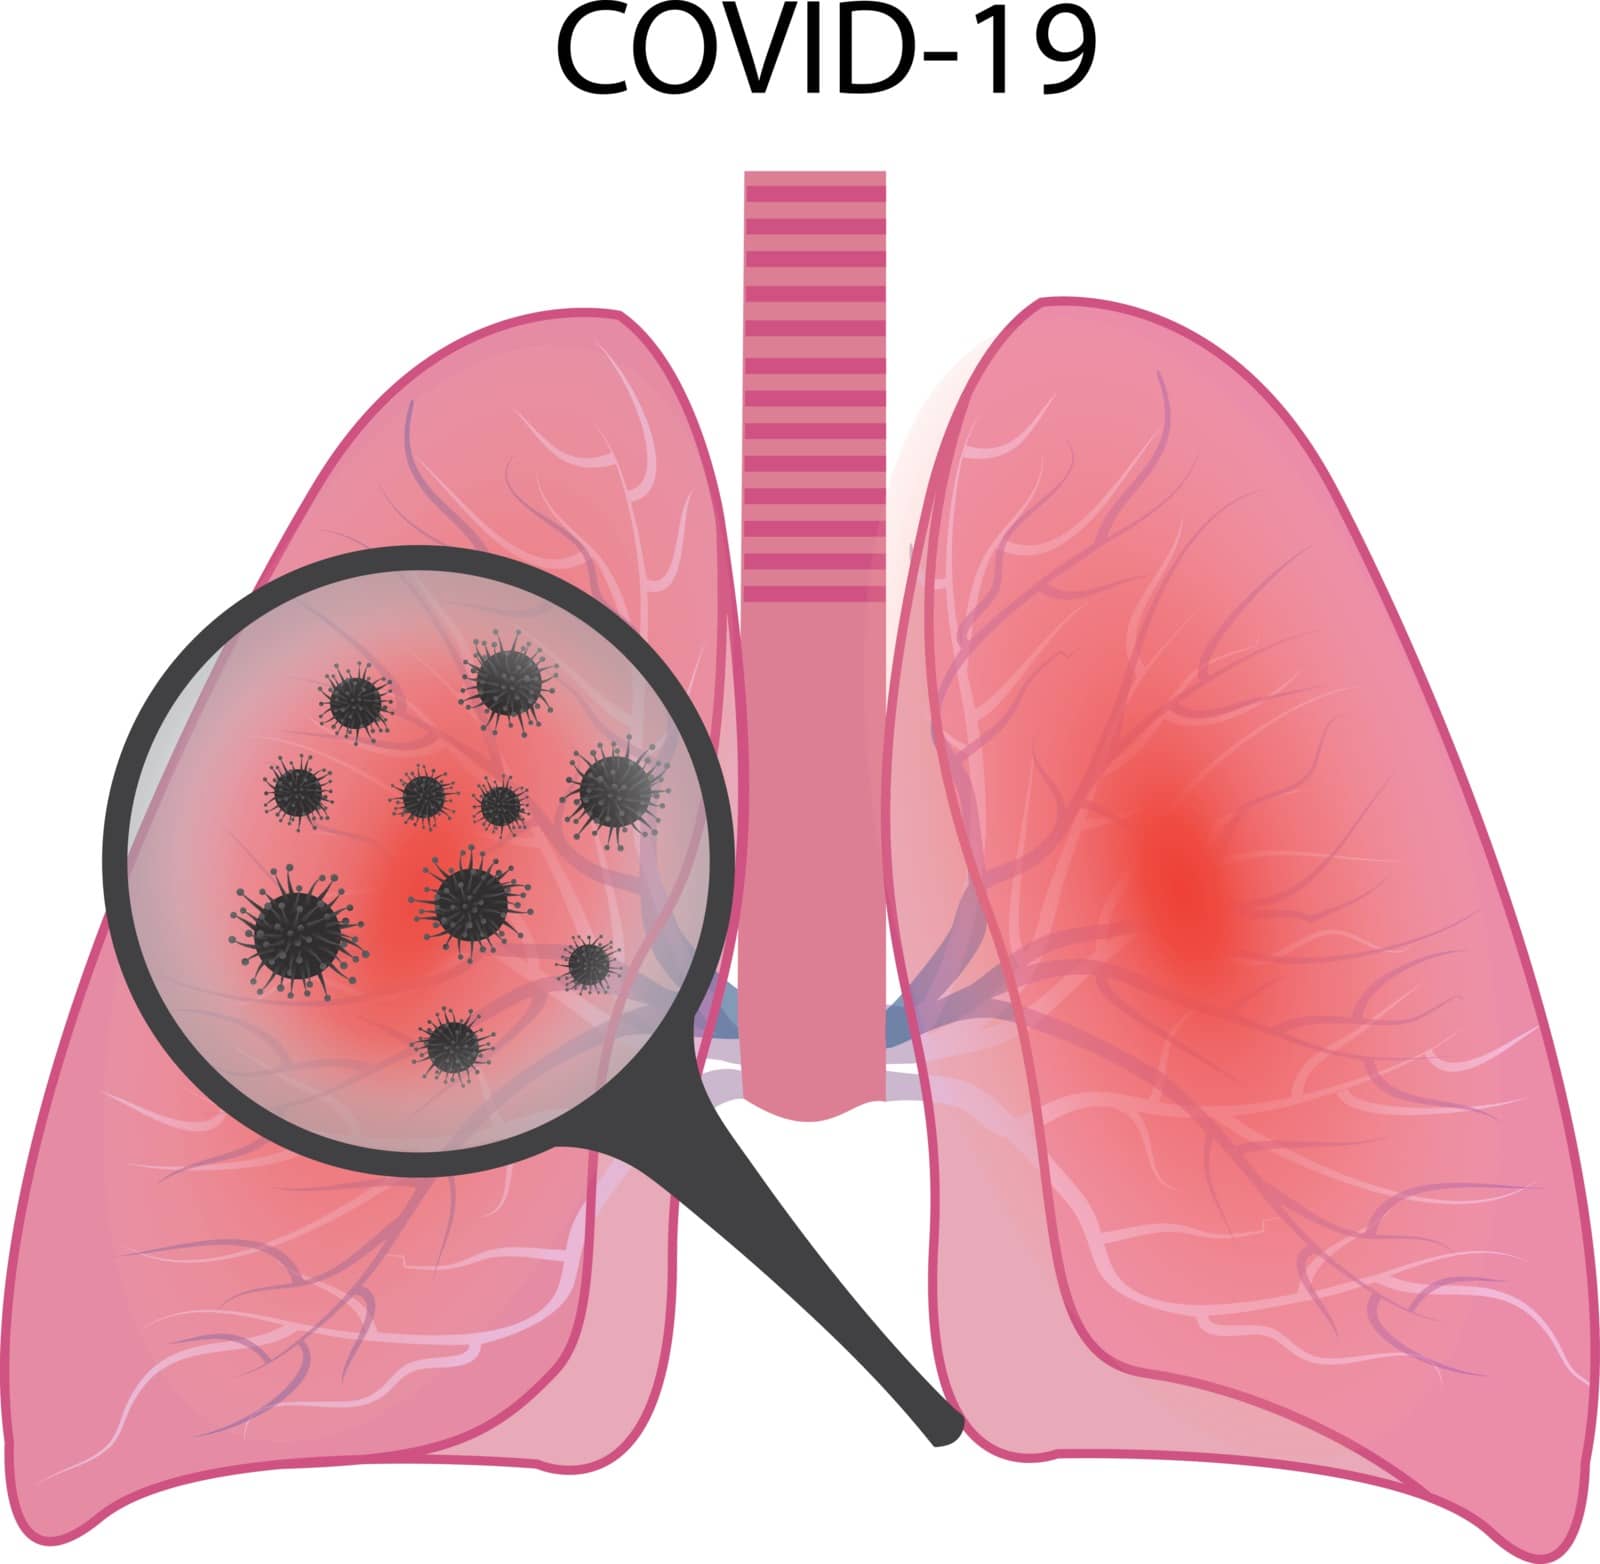 Lungs affected with coronavirus infection COVID19 by Olena758